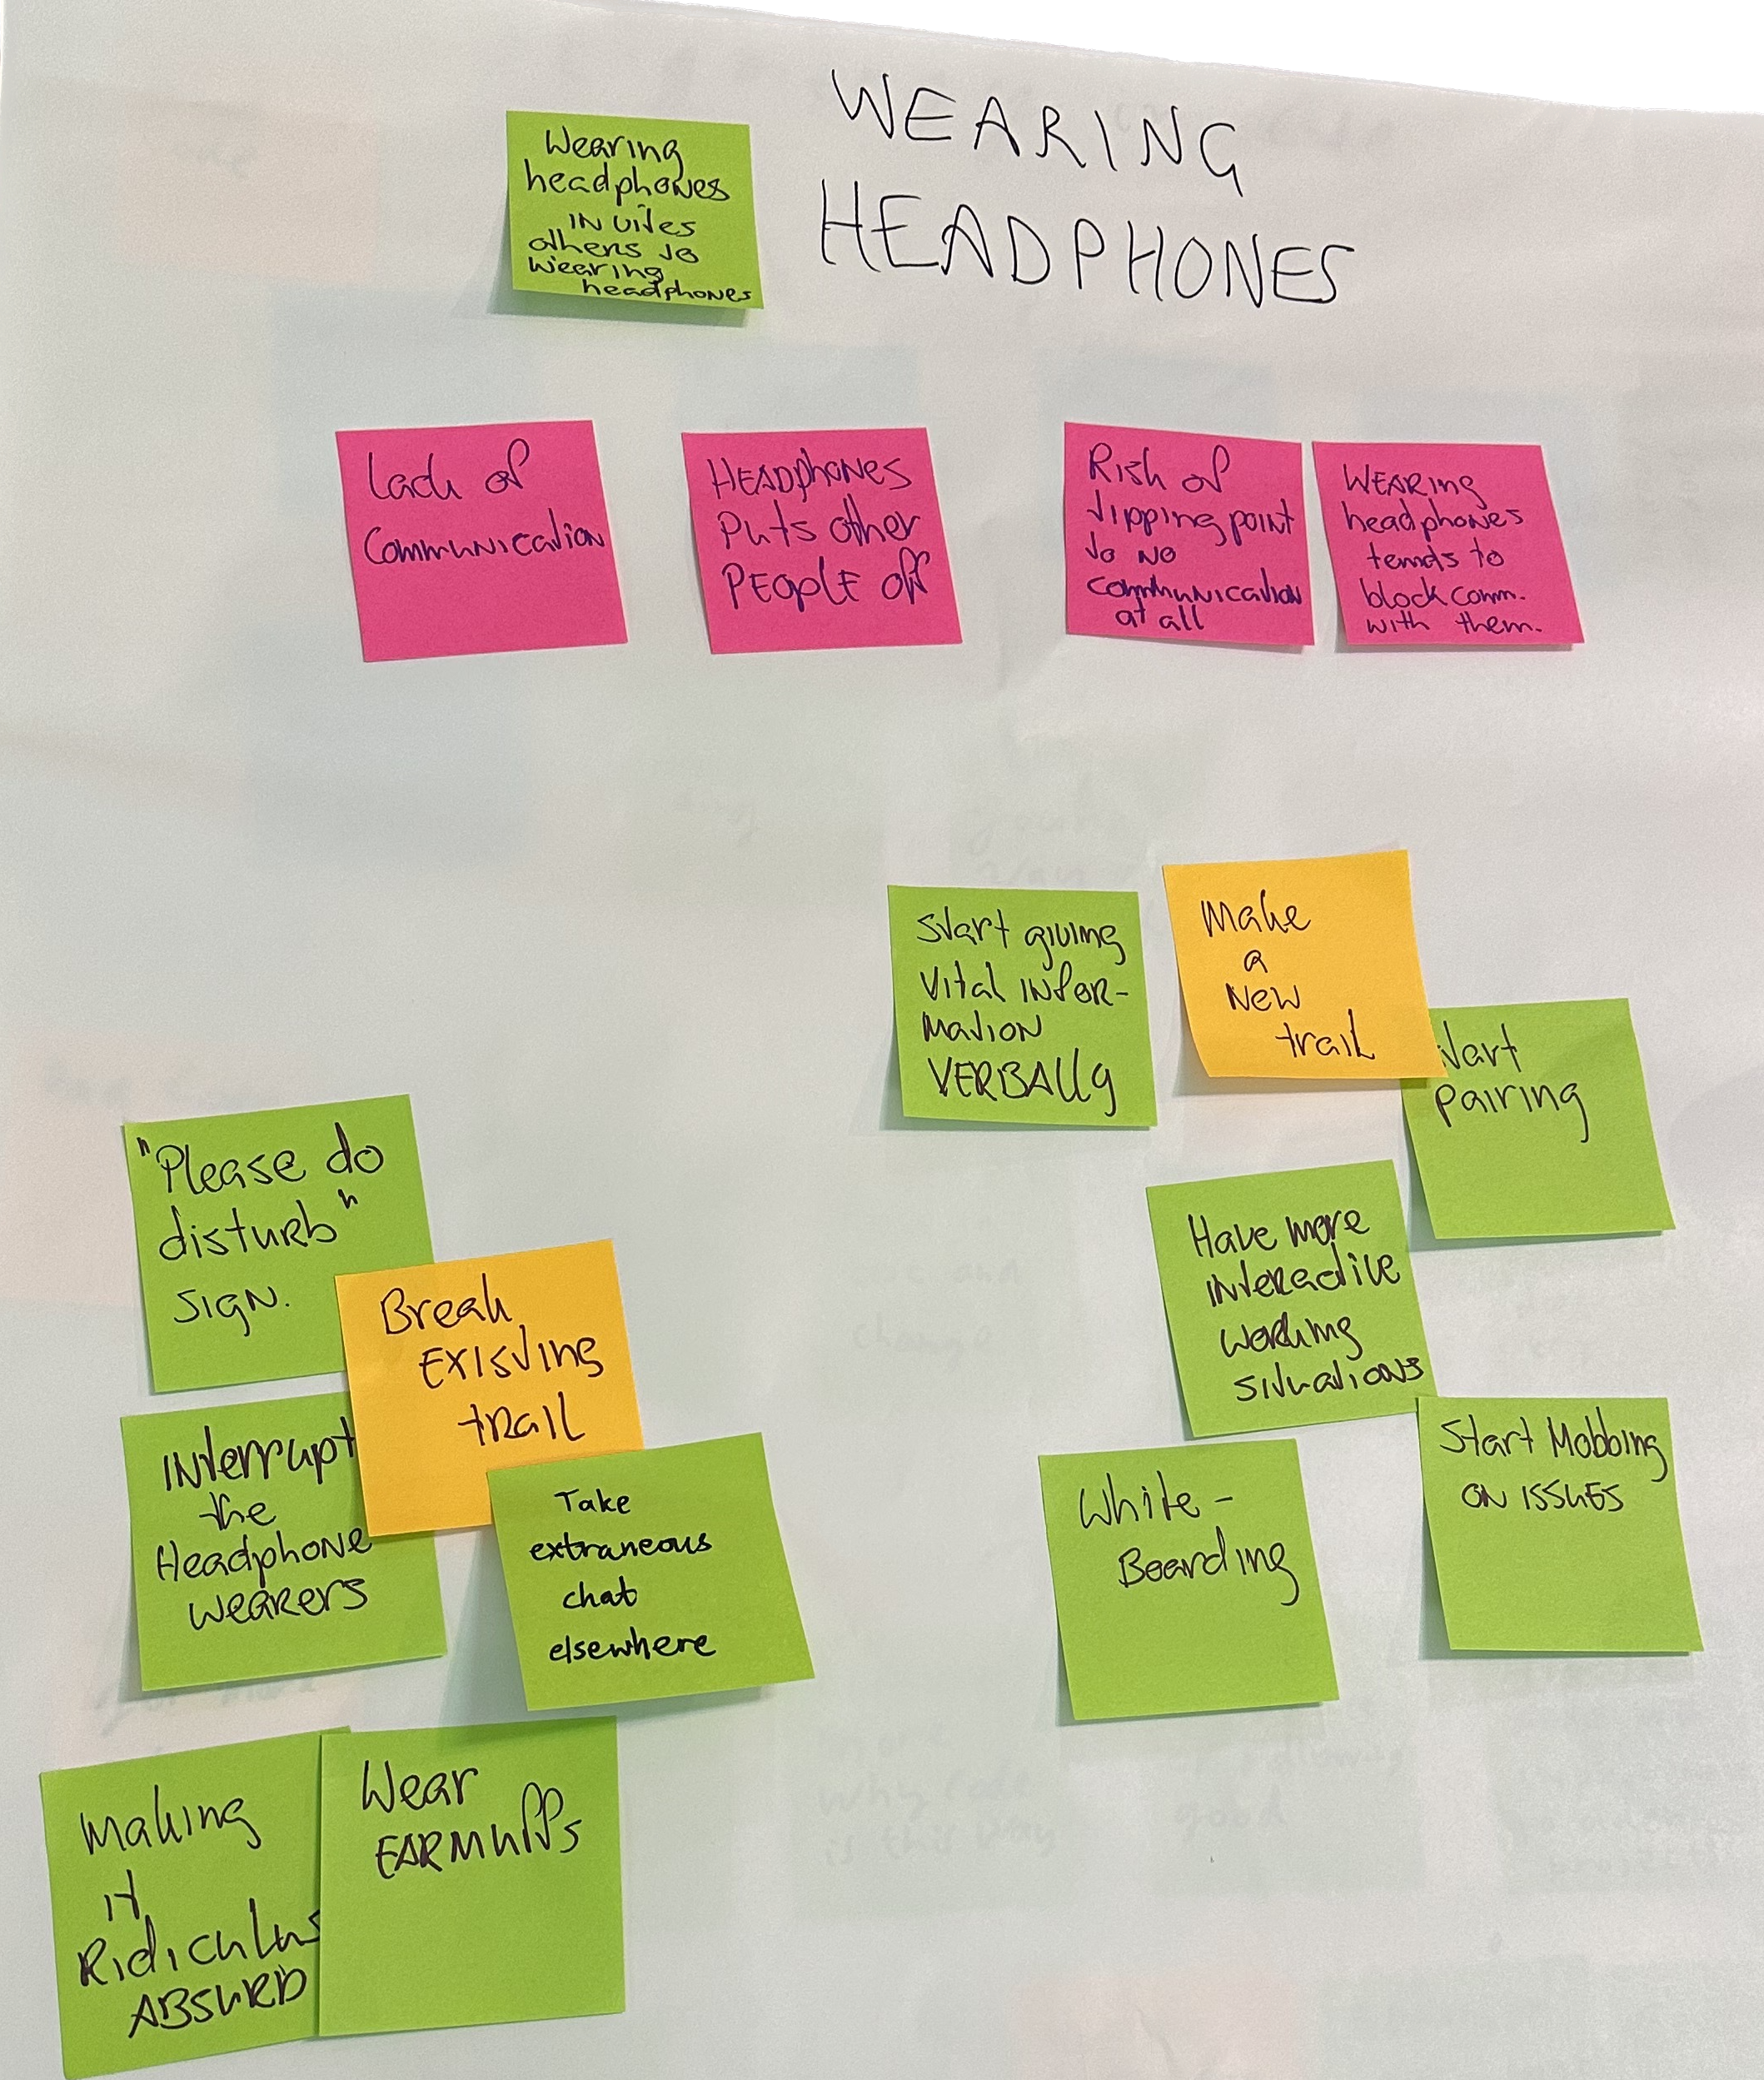 Poster of headphones story with post-its, written out below.